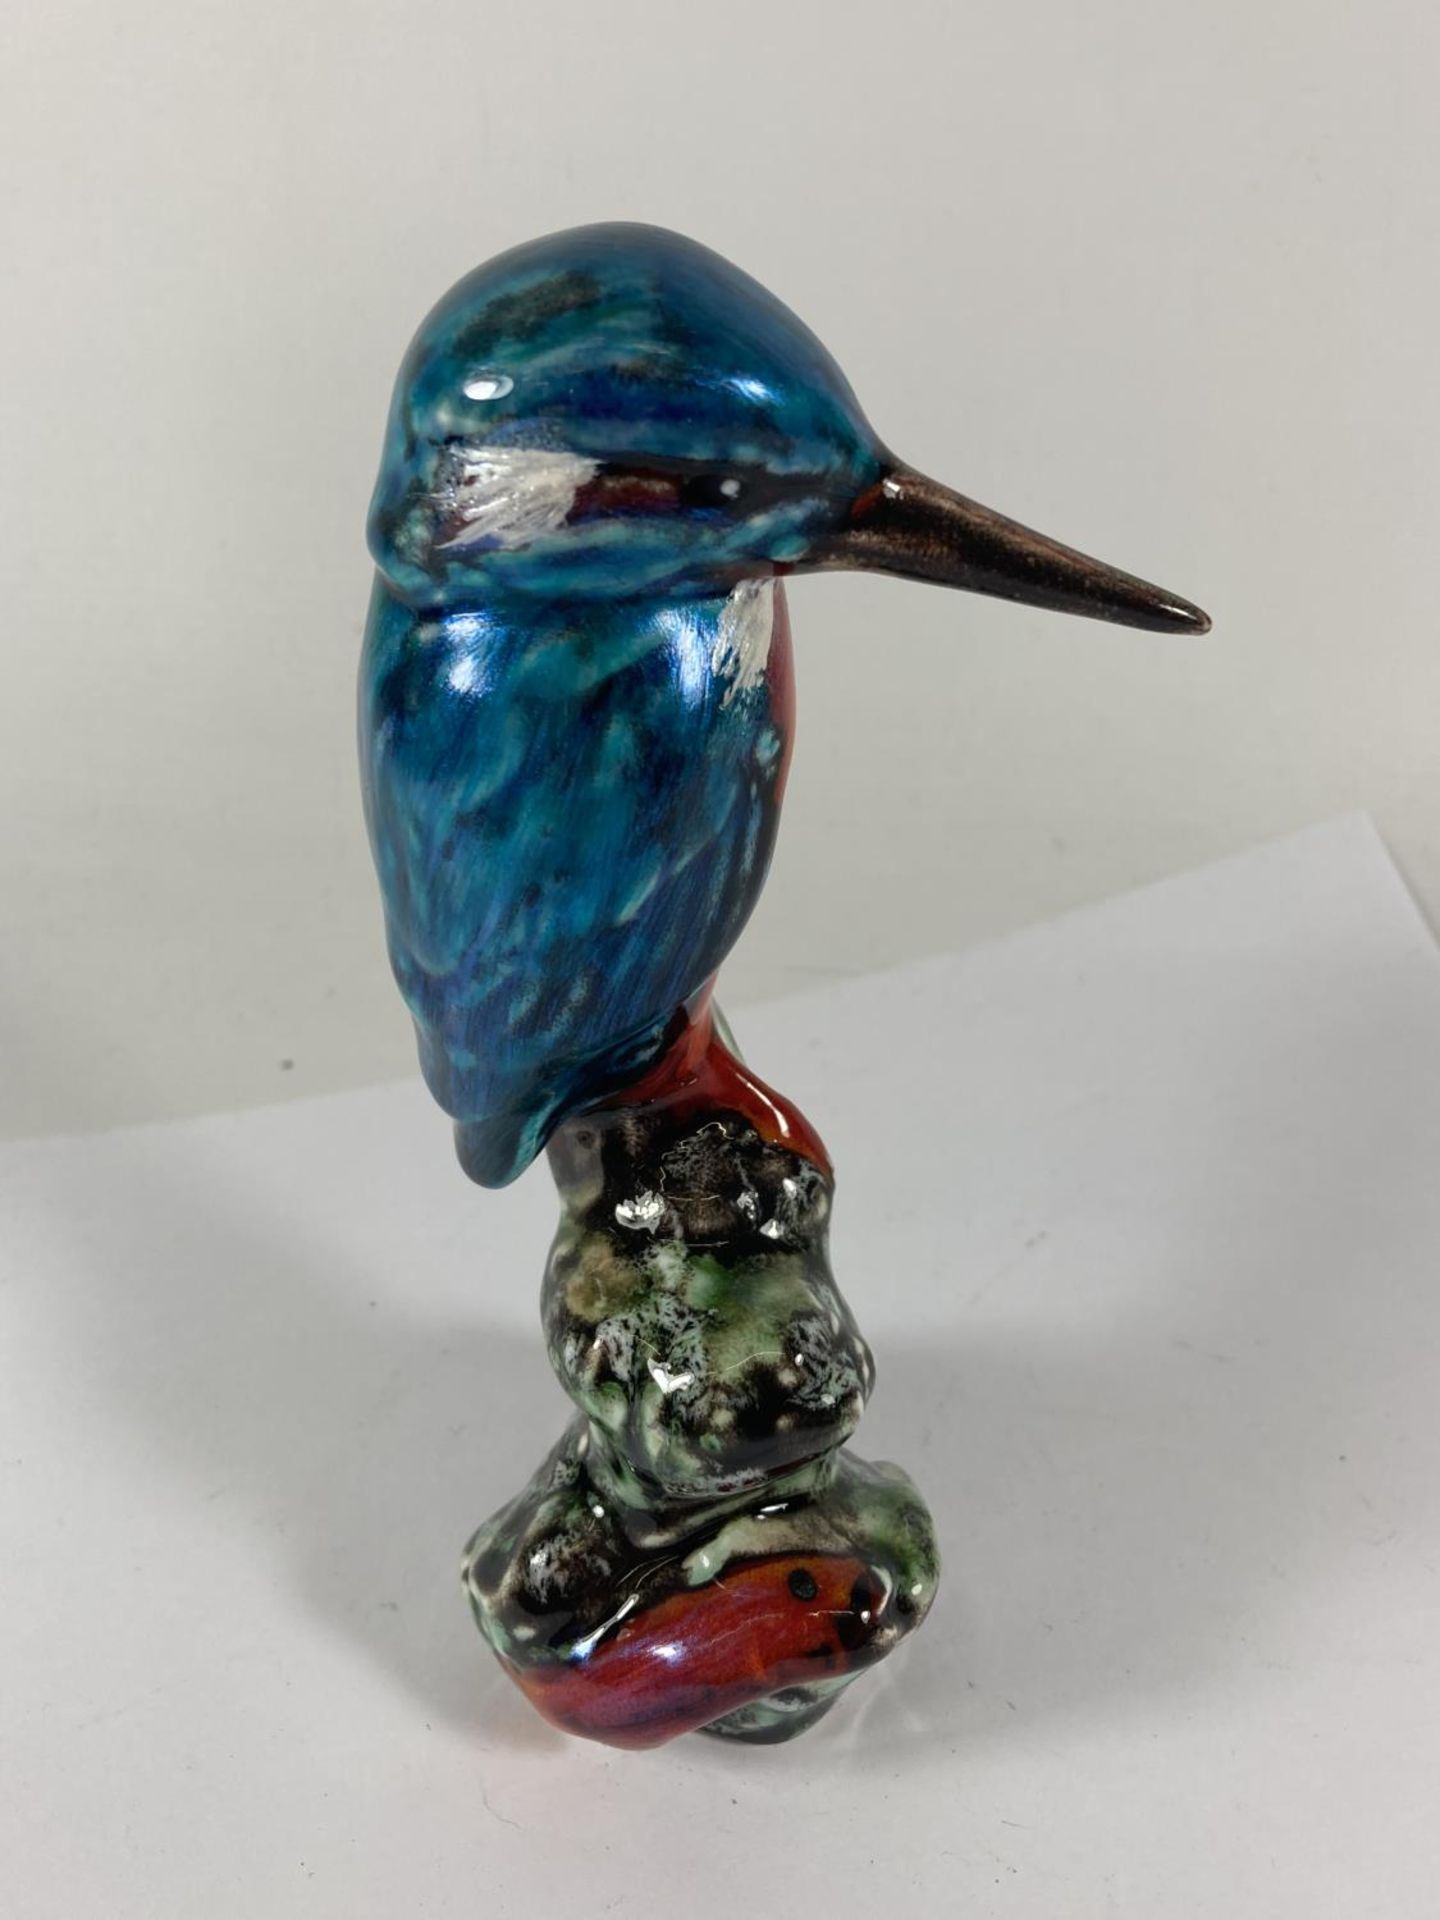 A HANDPAINTED AND SIGNED IN GOLD ANITA HARRIS KINGFISHER FIGURE - Image 4 of 6